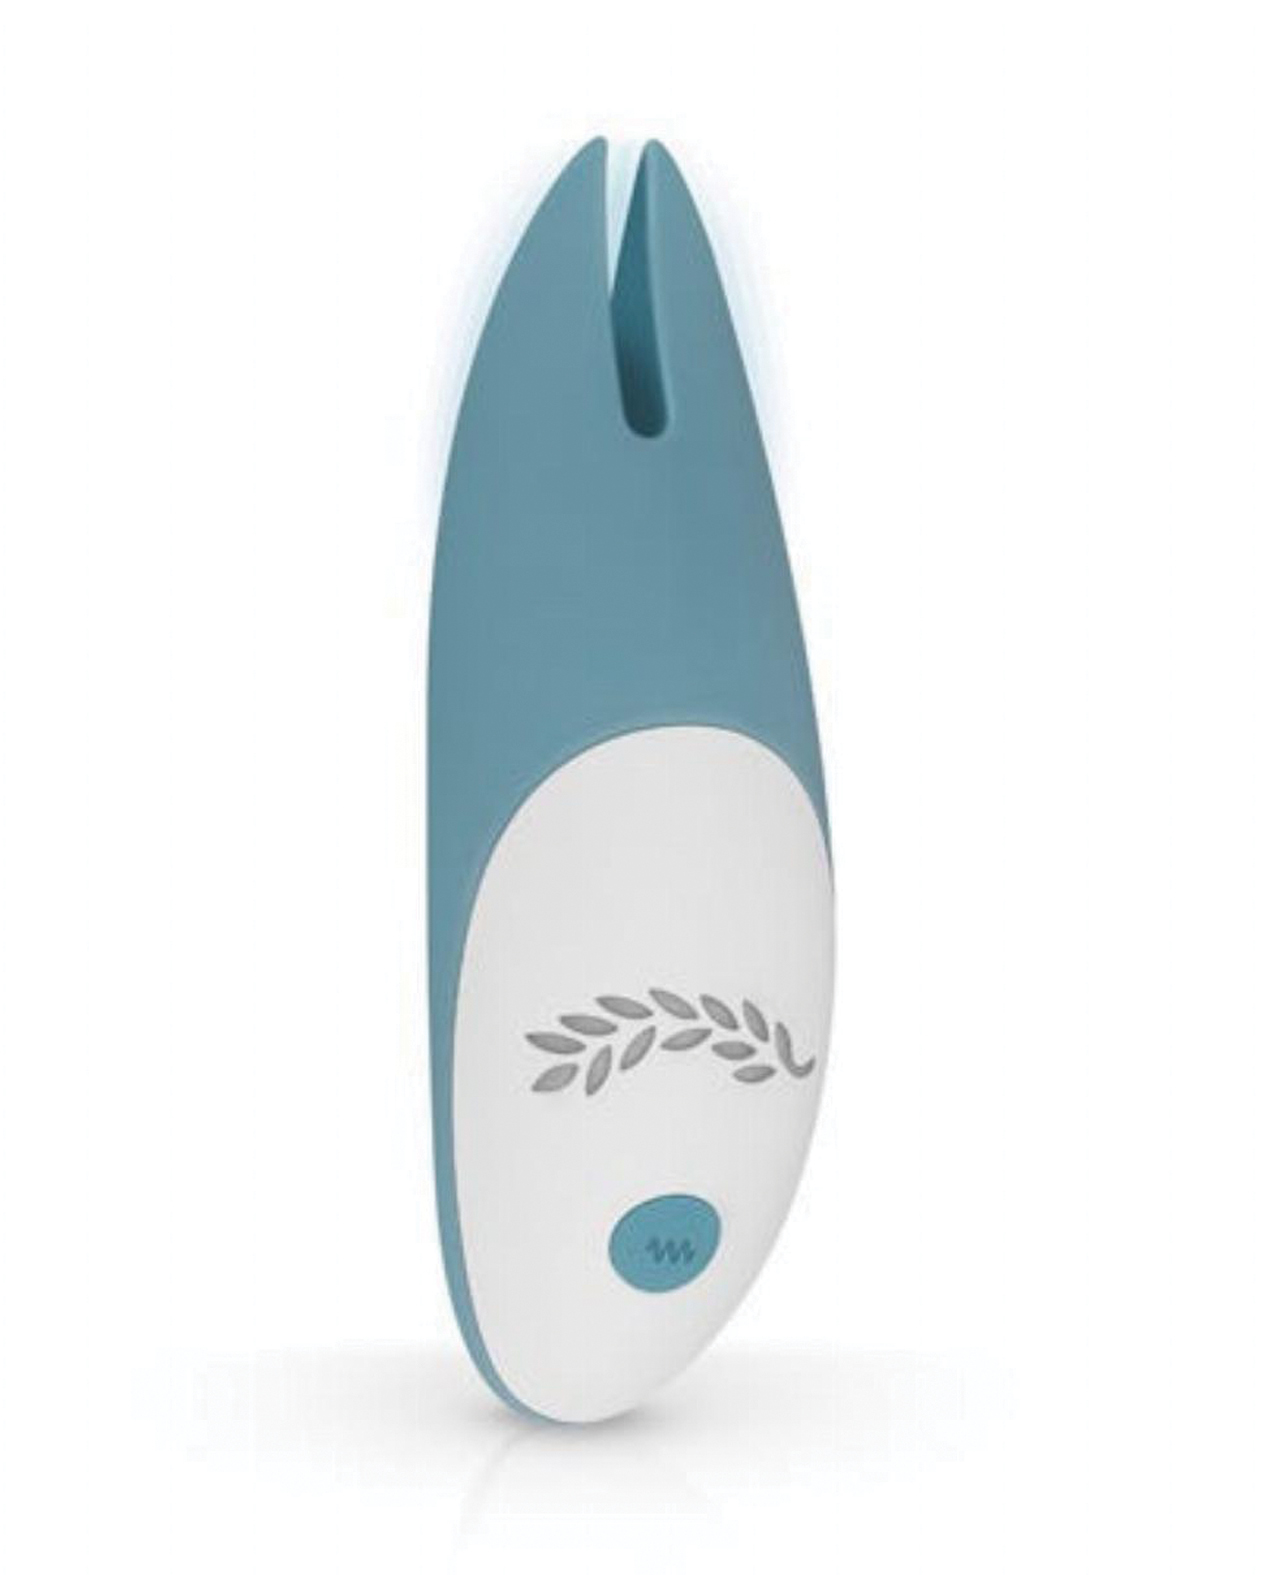 Bloom The Tulip Clit Stimulator in Teal and white